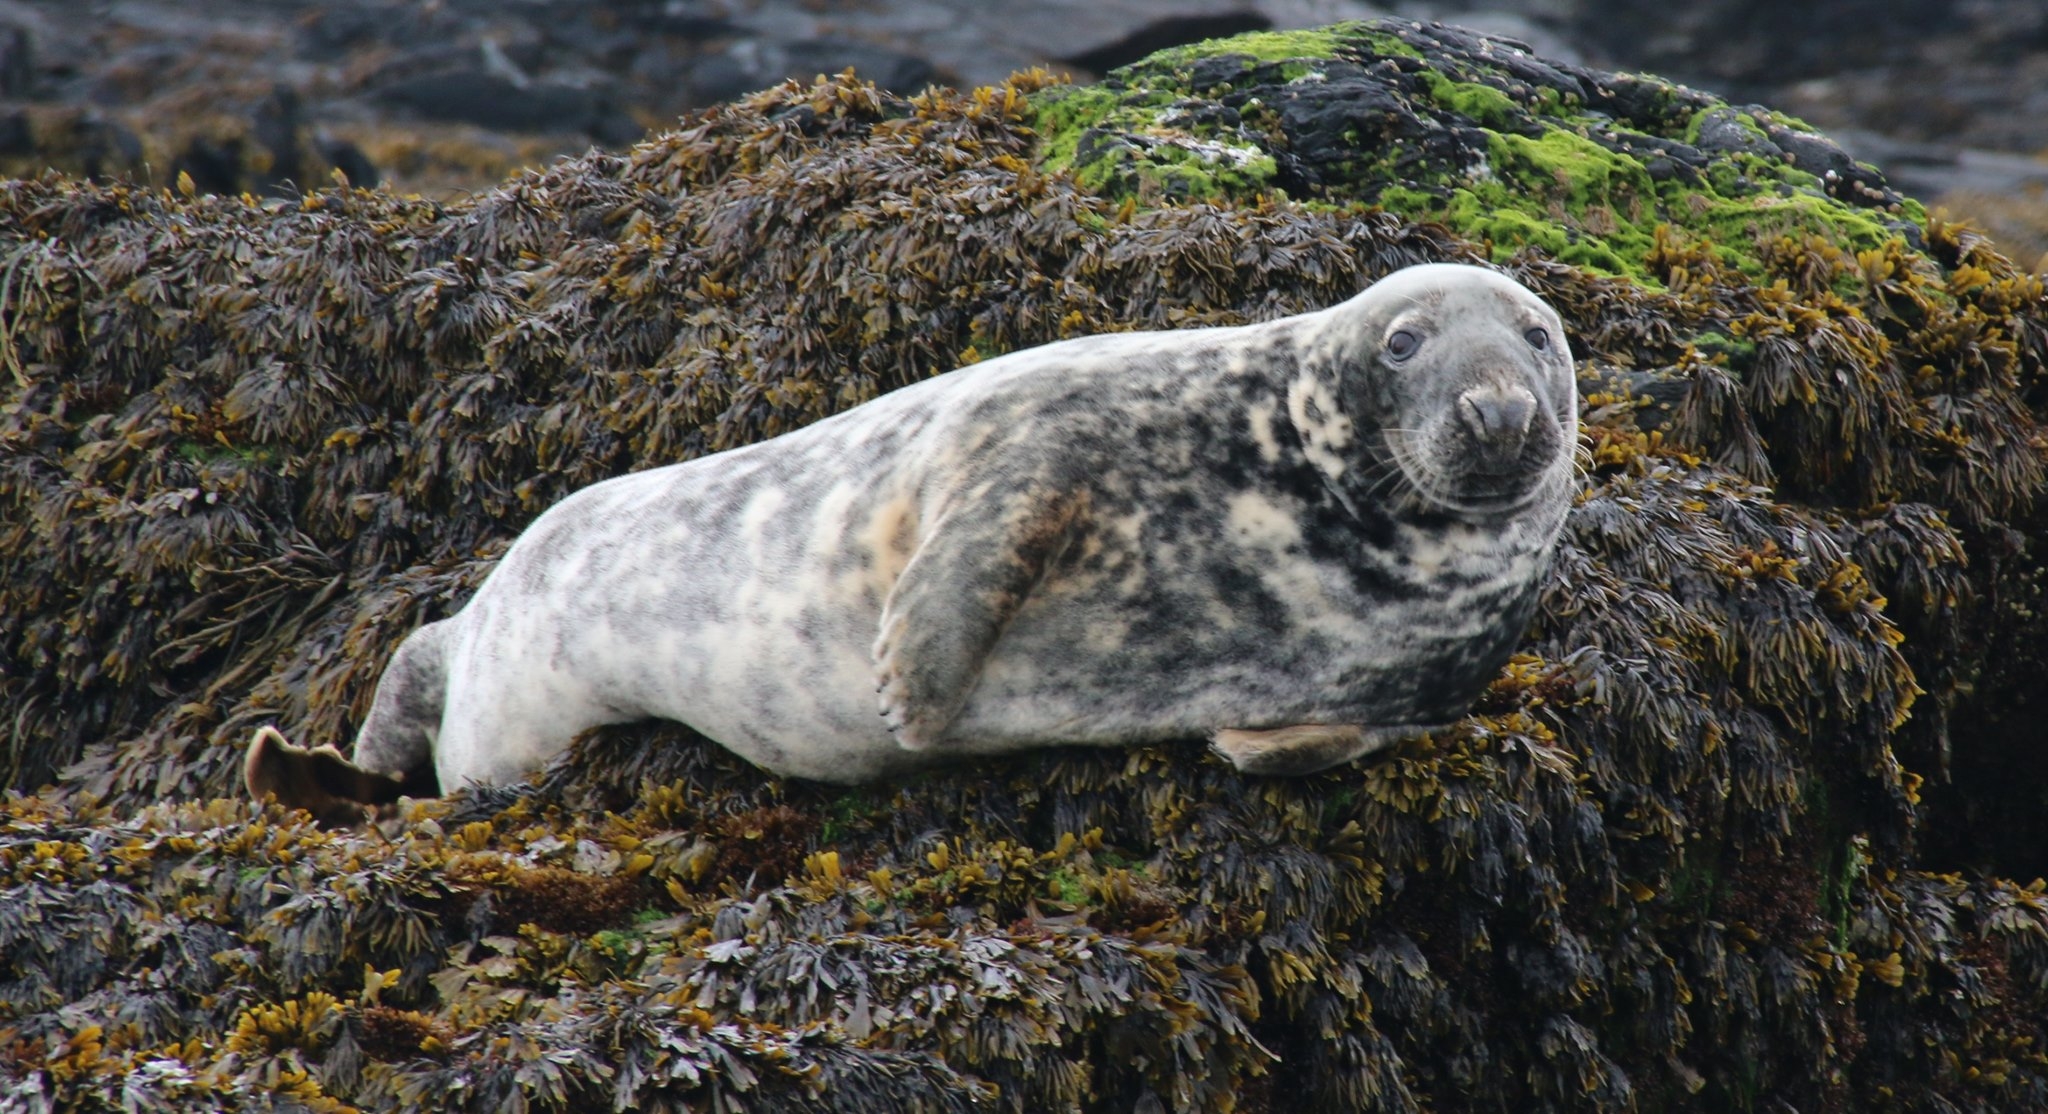 Watching Wildlife Well: Seals of St Clements